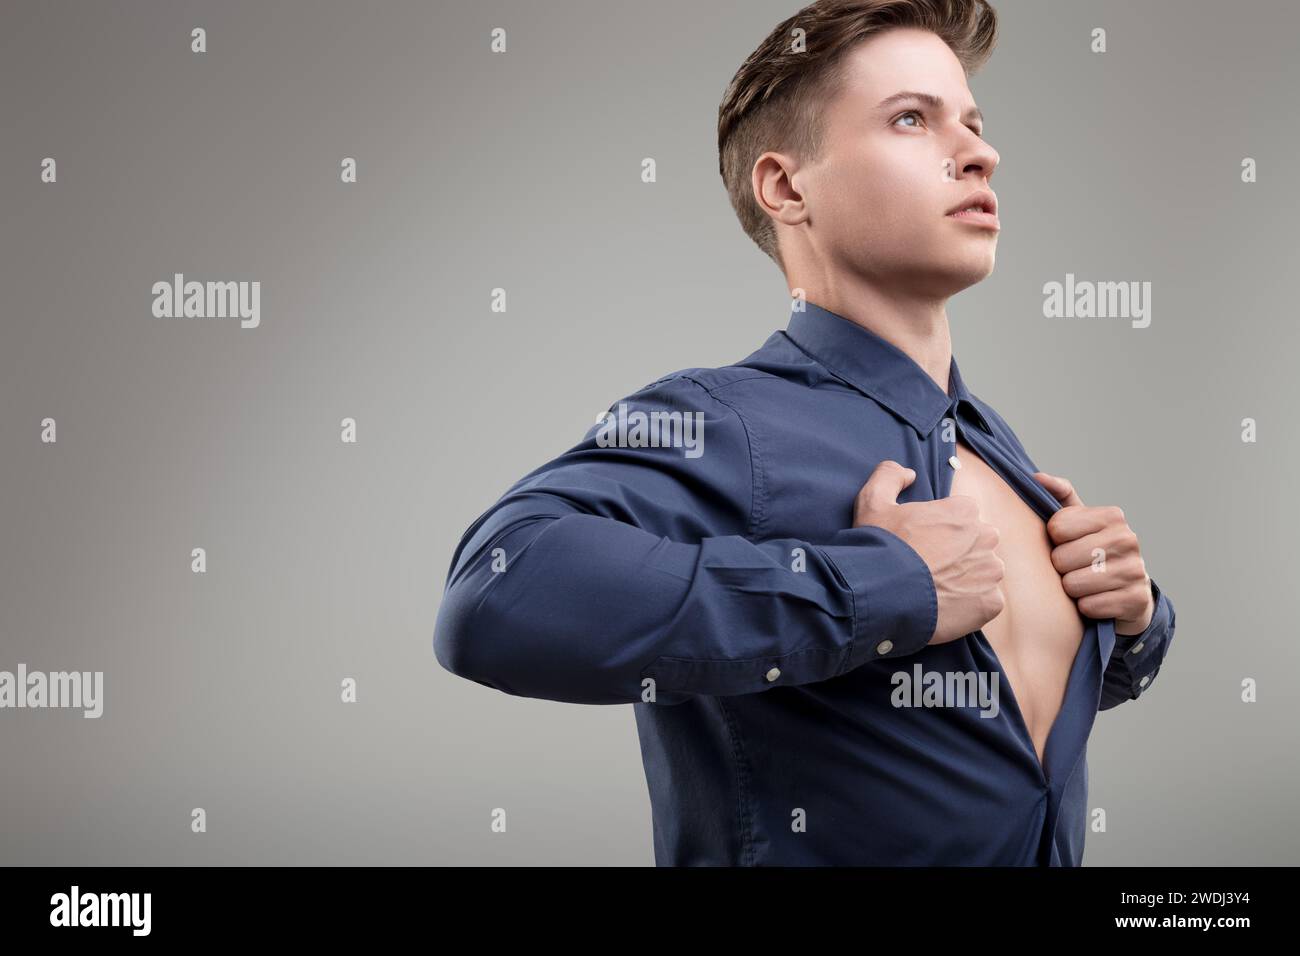 Dramatically opening his shirt, he showcases the strength that lies beneath the surface of everyday attire Stock Photo